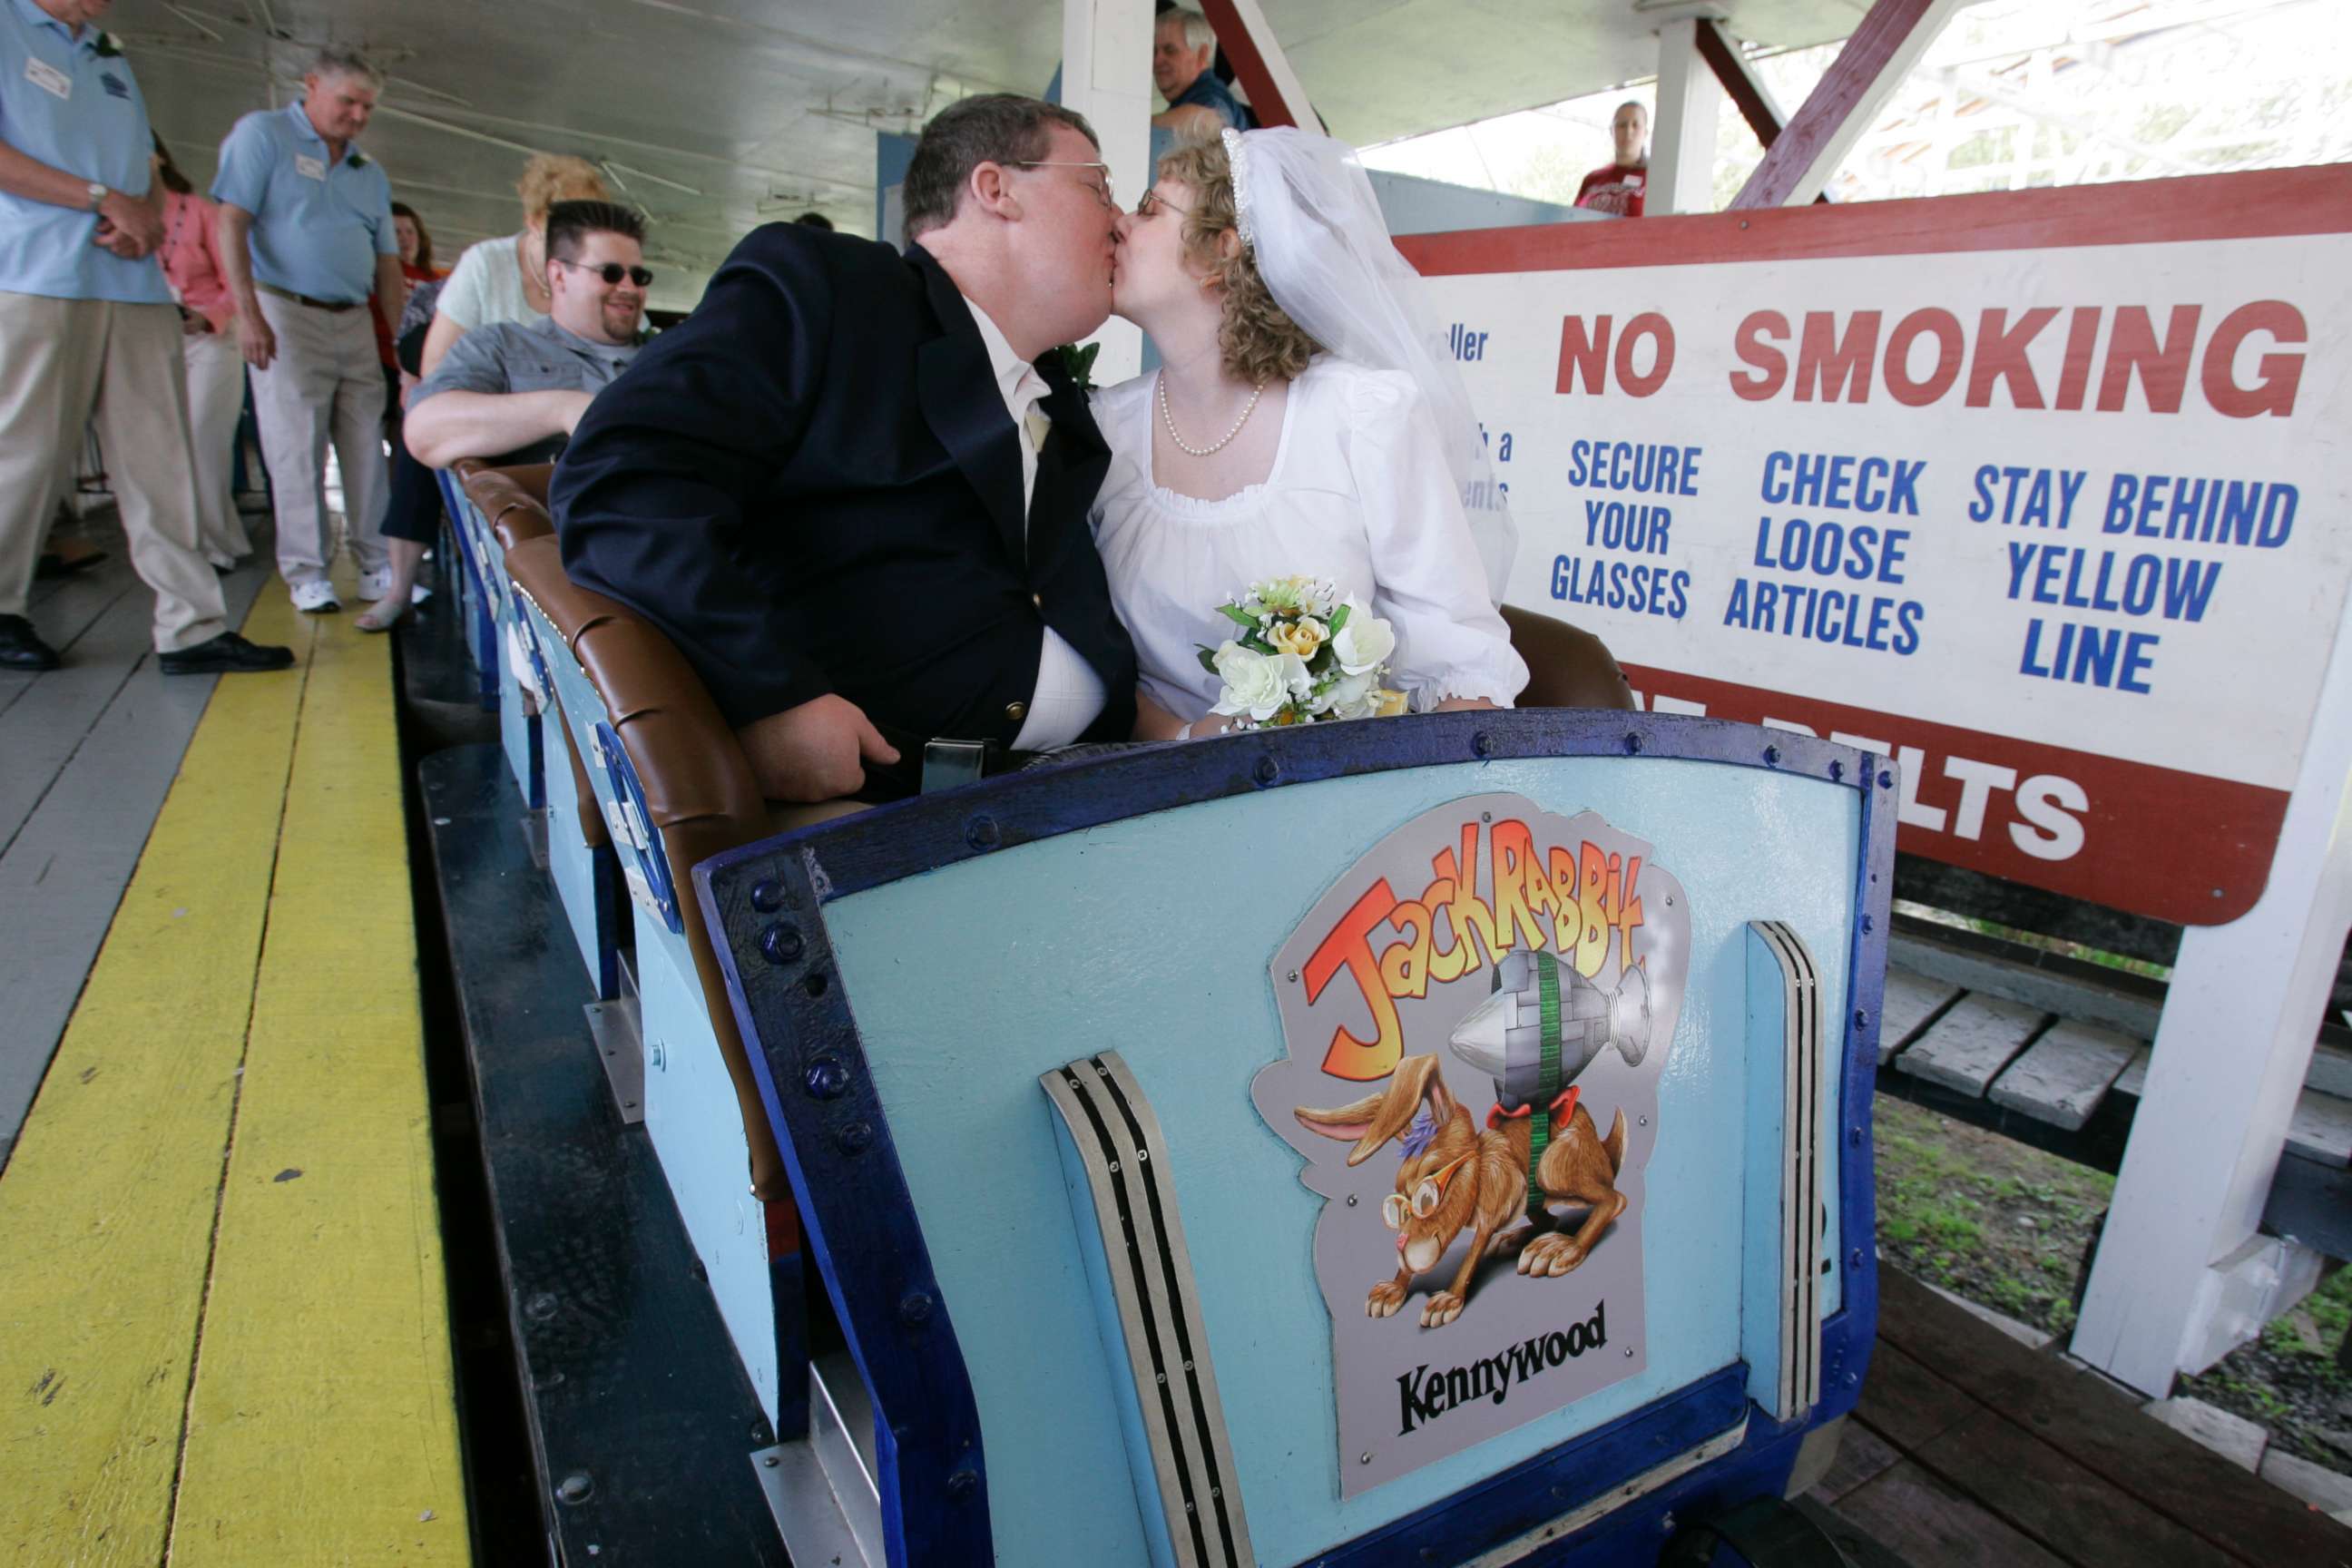 PHOTO: Brian and Pam Kanai got married on the Jack Rabbit roller coaster at Kennywood Park in West Mifflin, Penn.